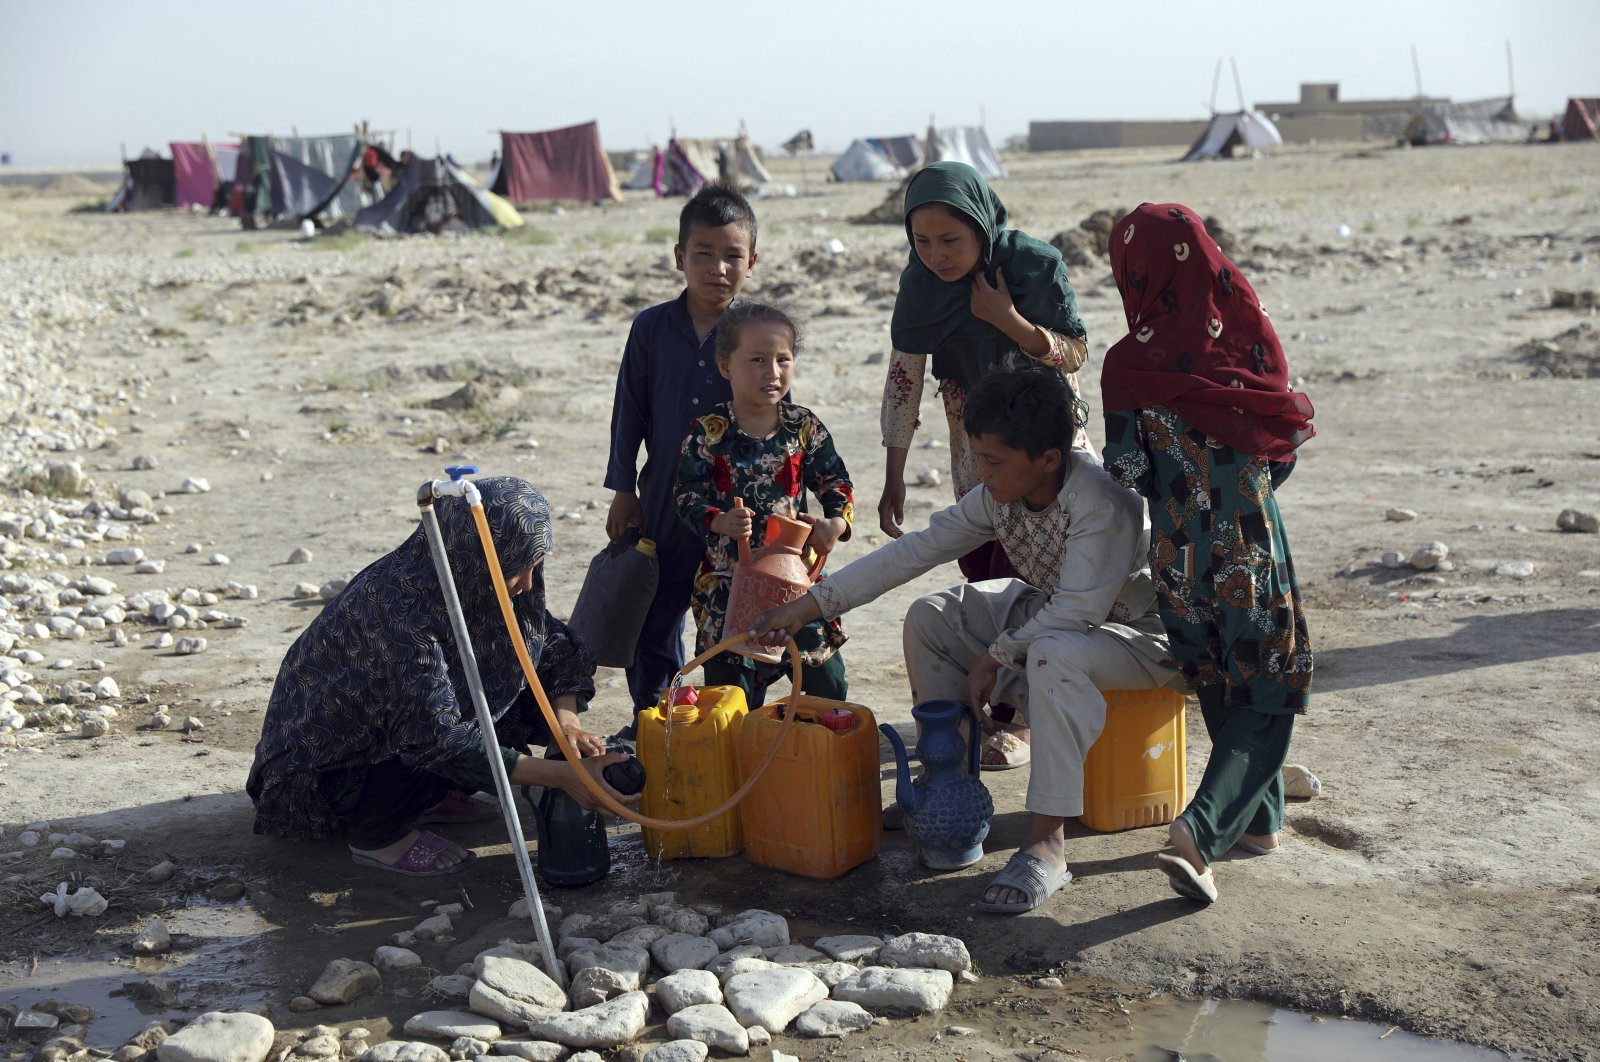 Internally displaced Afghans, who fled their home due to fighting between the Taliban and Afghan security personnel, fill water containers from a public water tap at a camp on the outskirts of Mazar-e-Sharif, northern Afghanistan, July 8, 2021. (AP Photo)